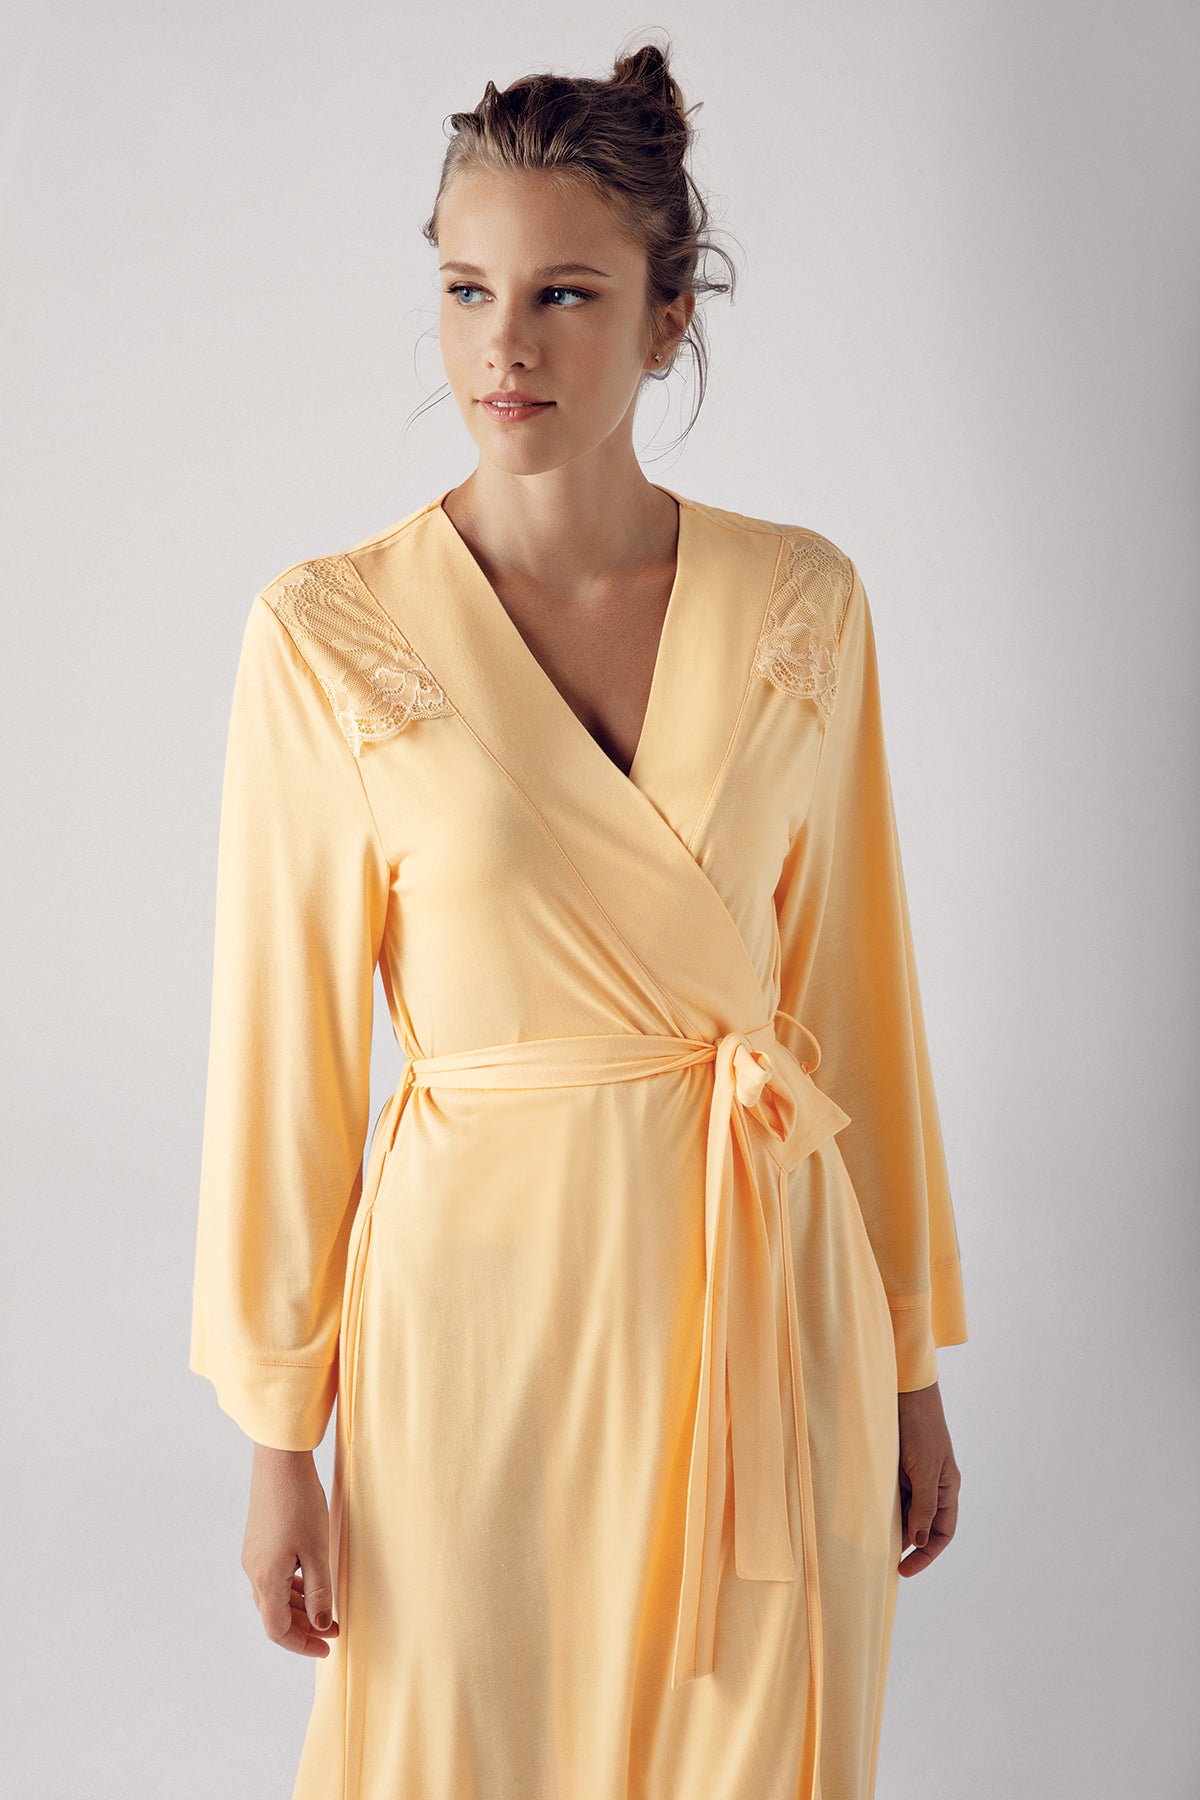 Shopymommy 13505 Lace Shoulder Maternity Robe Yellow